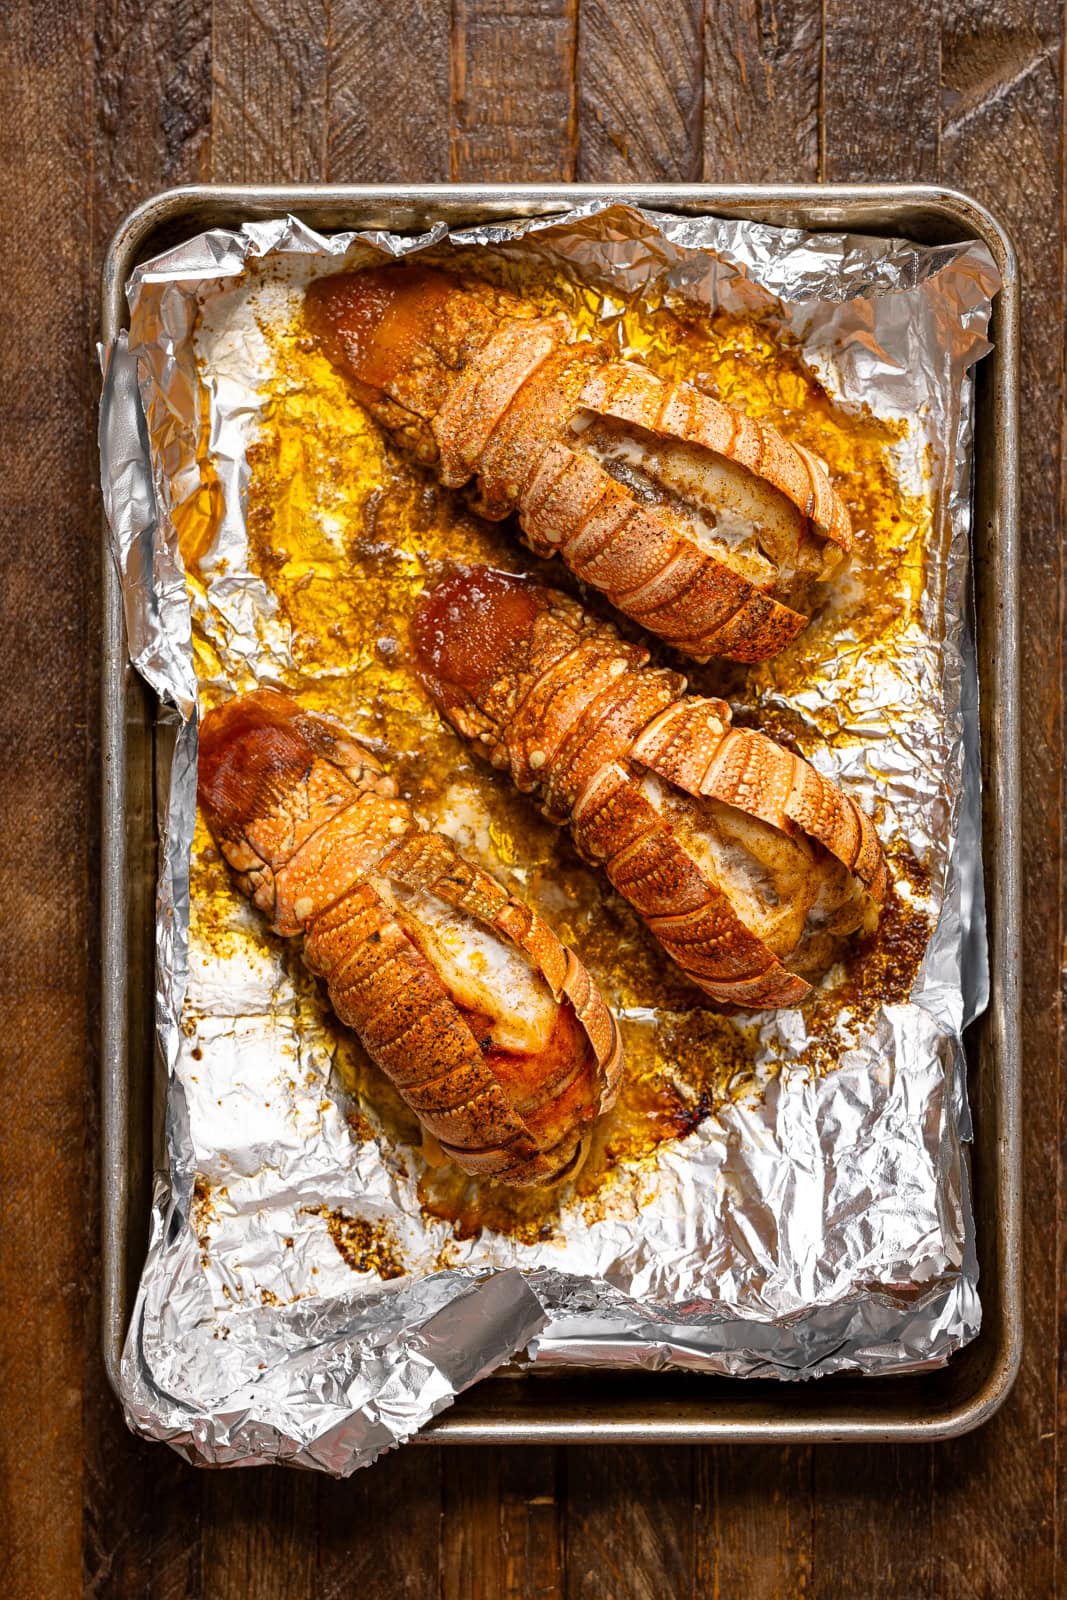 Cooked lobster tails on a baking sheet with foil paper.